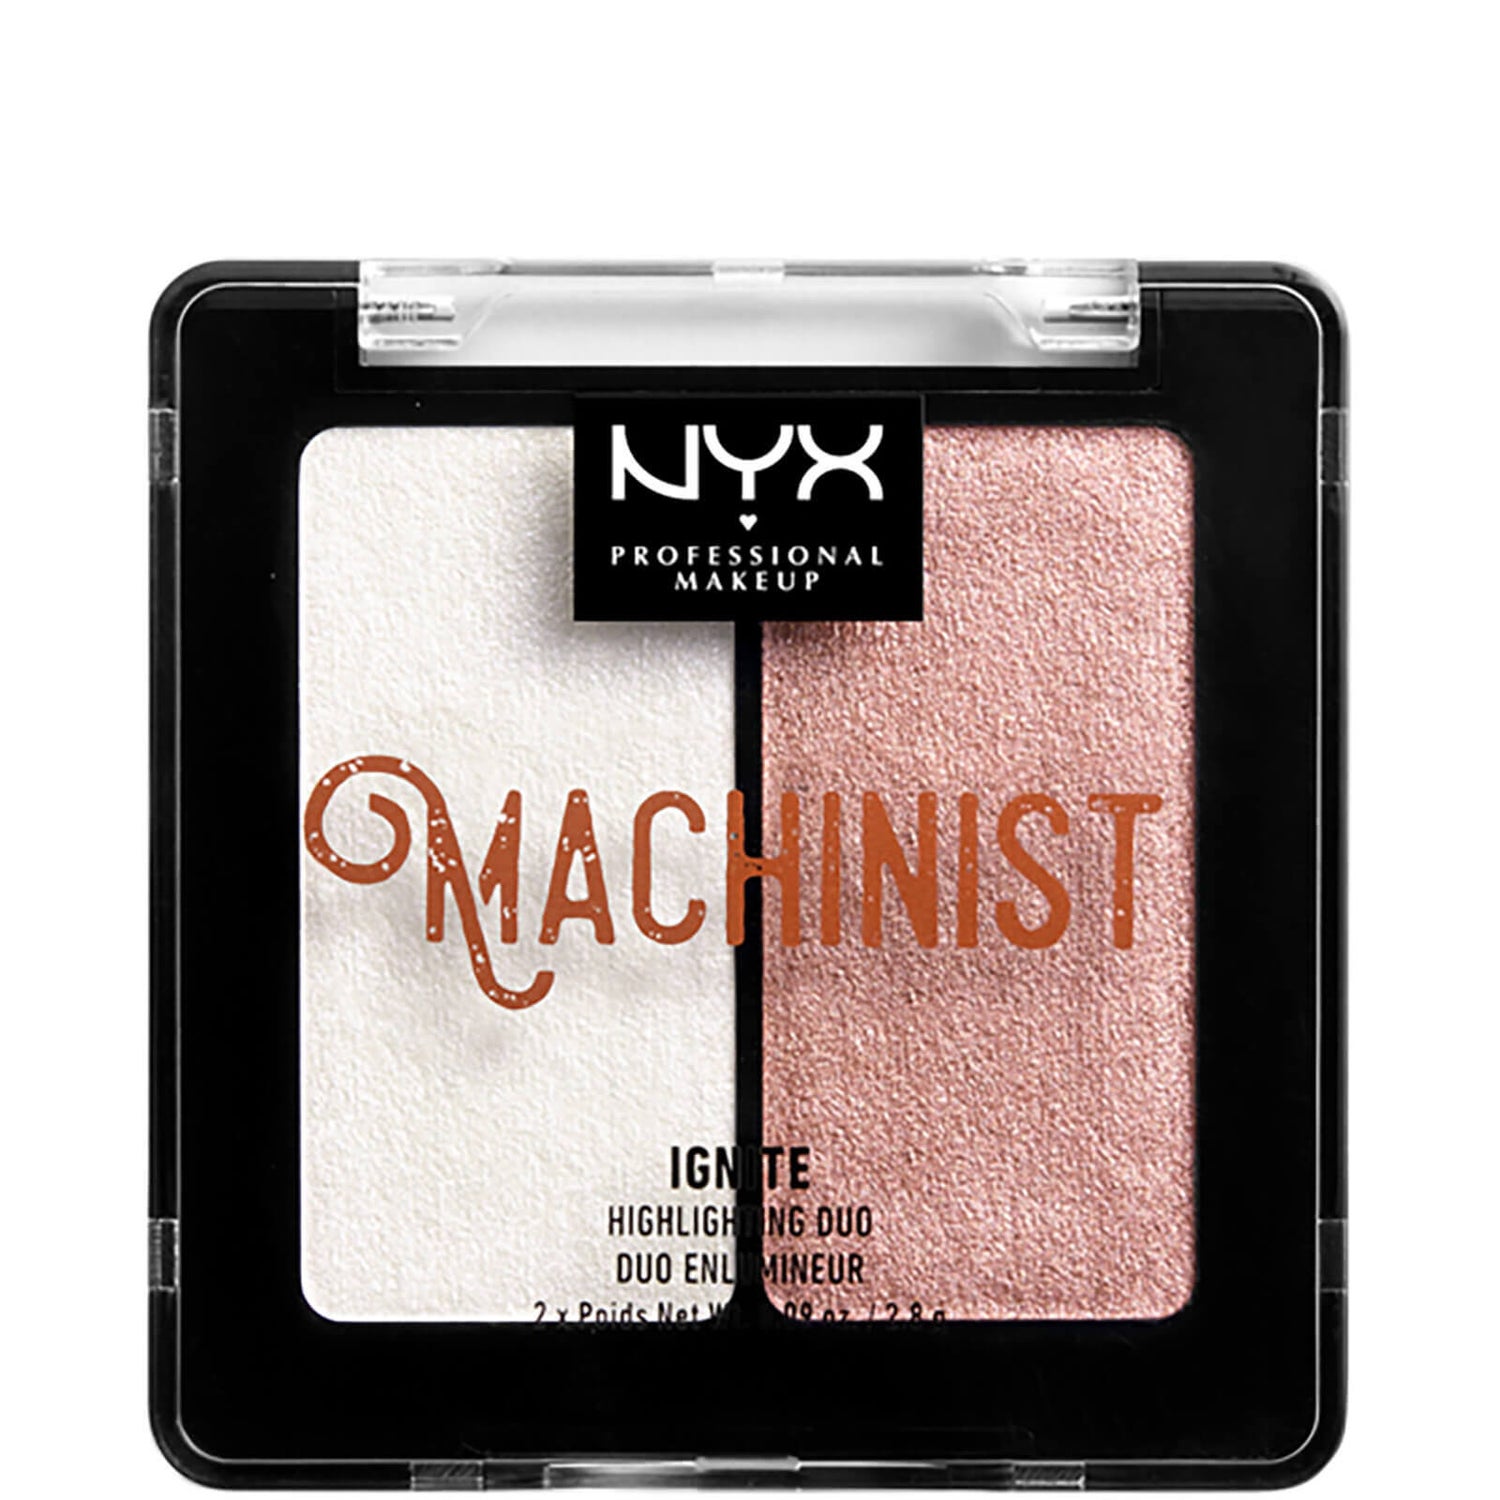 NYX Professional Makeup Machinist Highlighter Duo Kit - Ignite